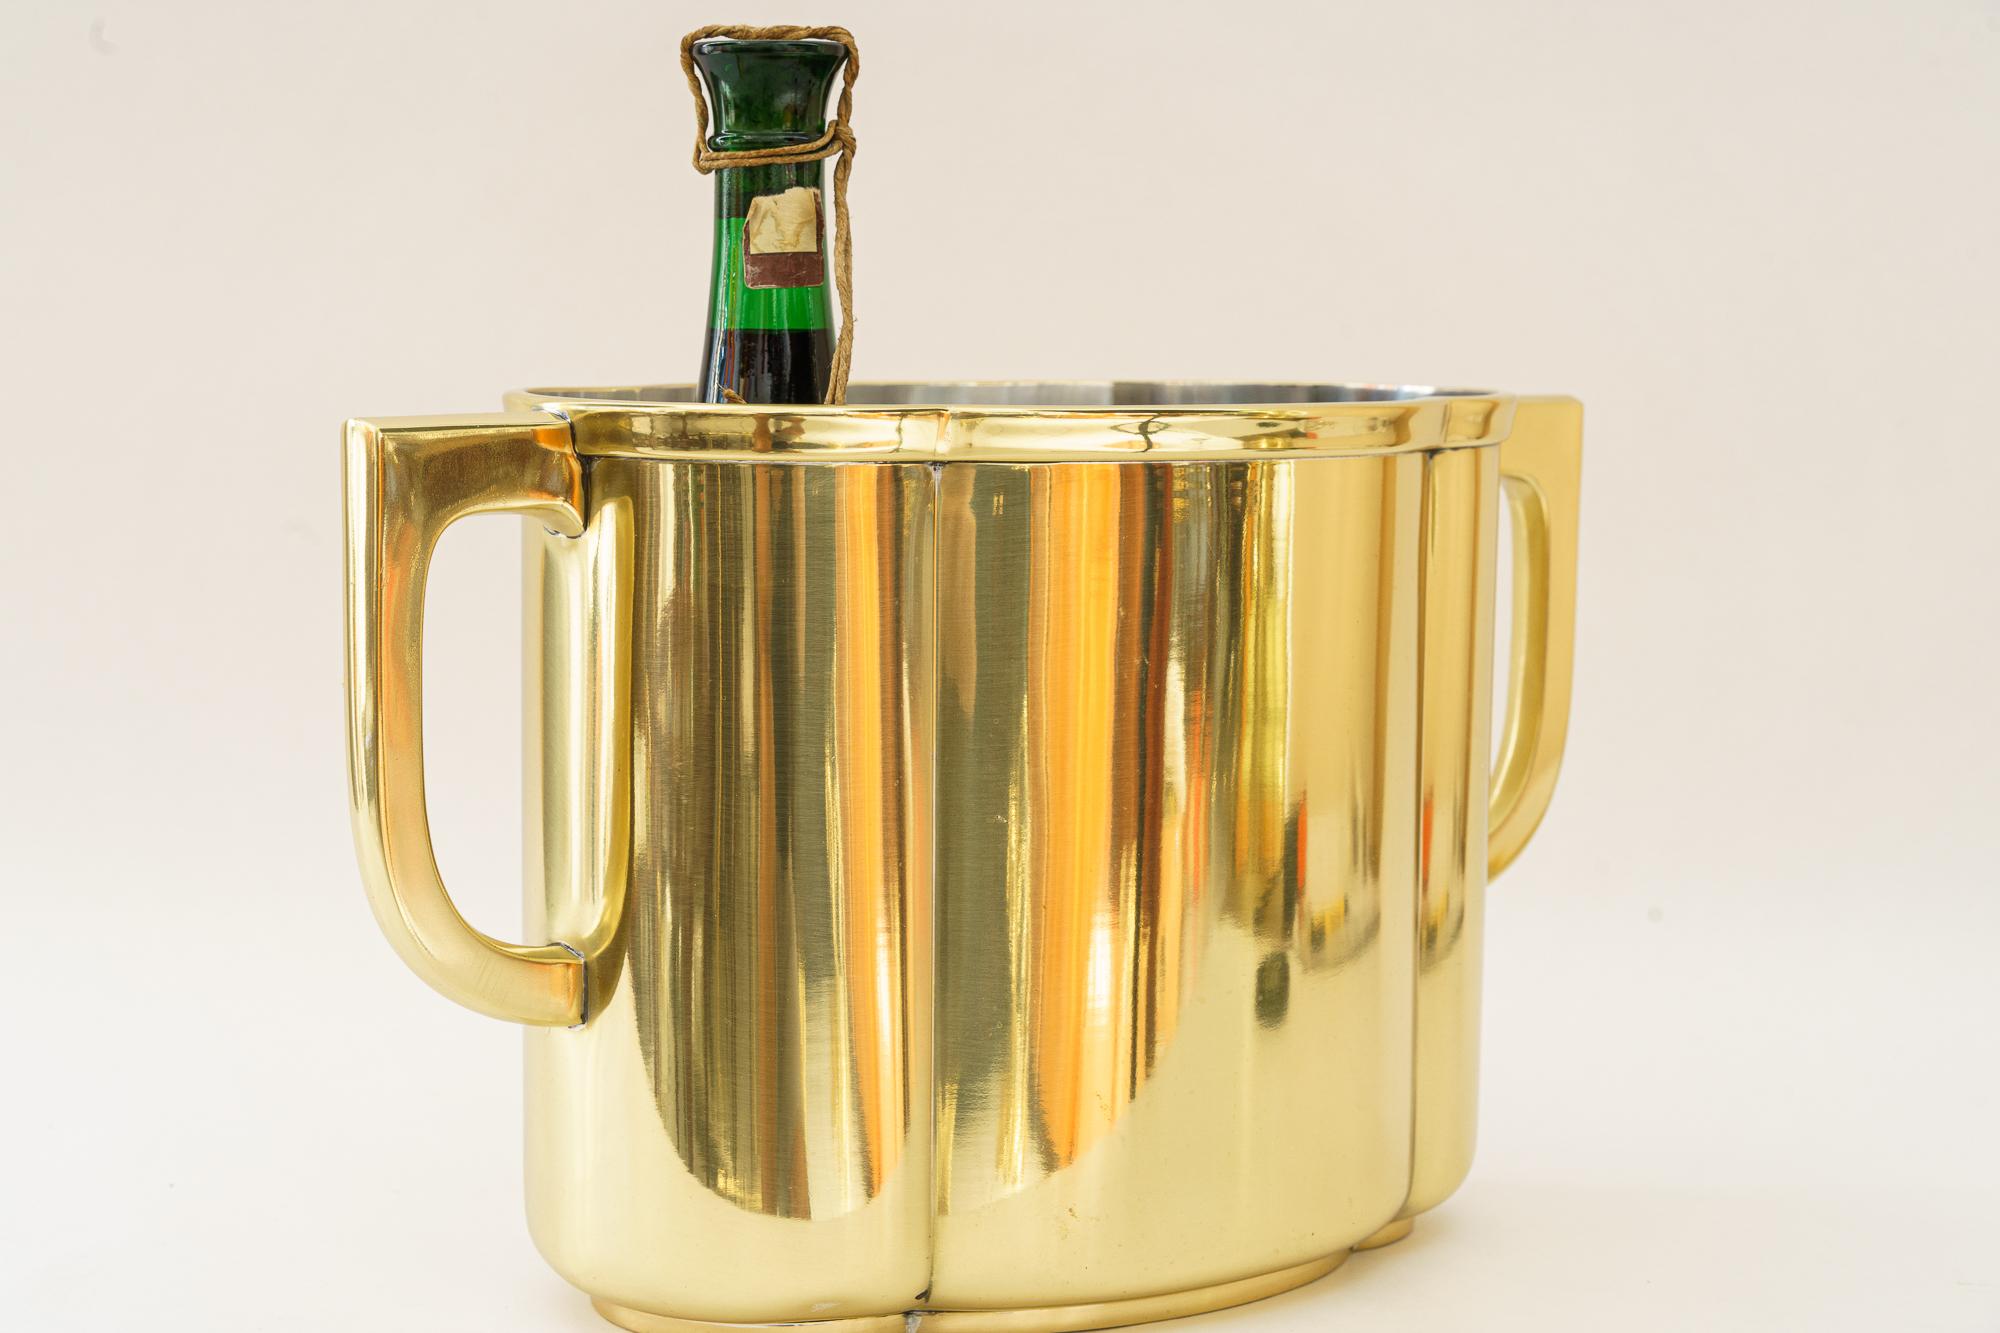 Early 20th Century WMF Art Deco Champagne Cooler, for 3 bottles Vienna Around 1920s ( marked )